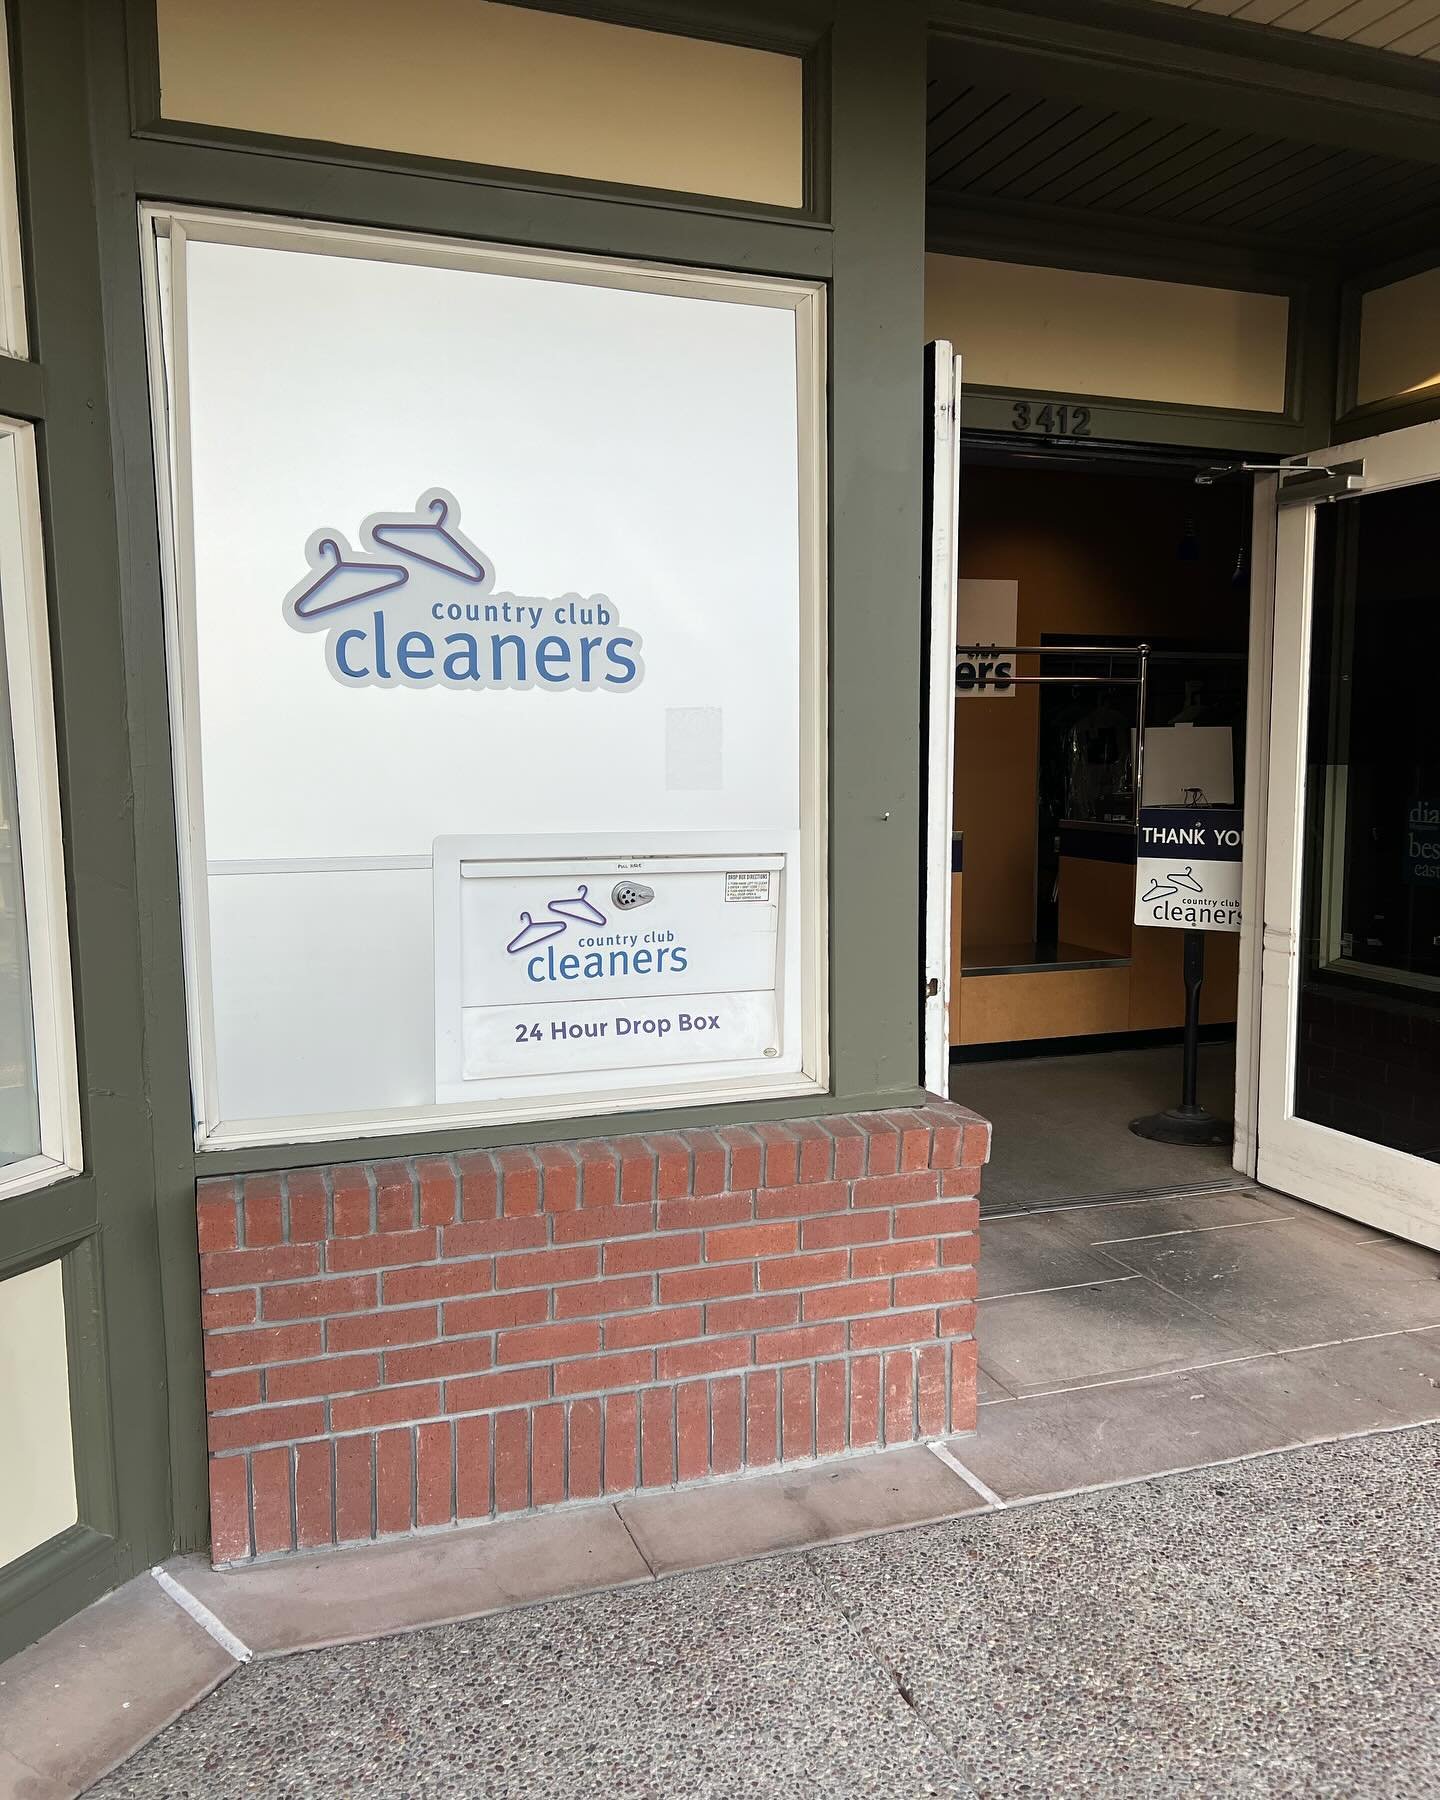 Did you know both of our retail store fronts have 24 hour drop boxes?  We do!  So even if we have closed for the day, you can still drop off your items! Your Country Club Cleaners bag is barcoded with your name so we will know it is your items! You c